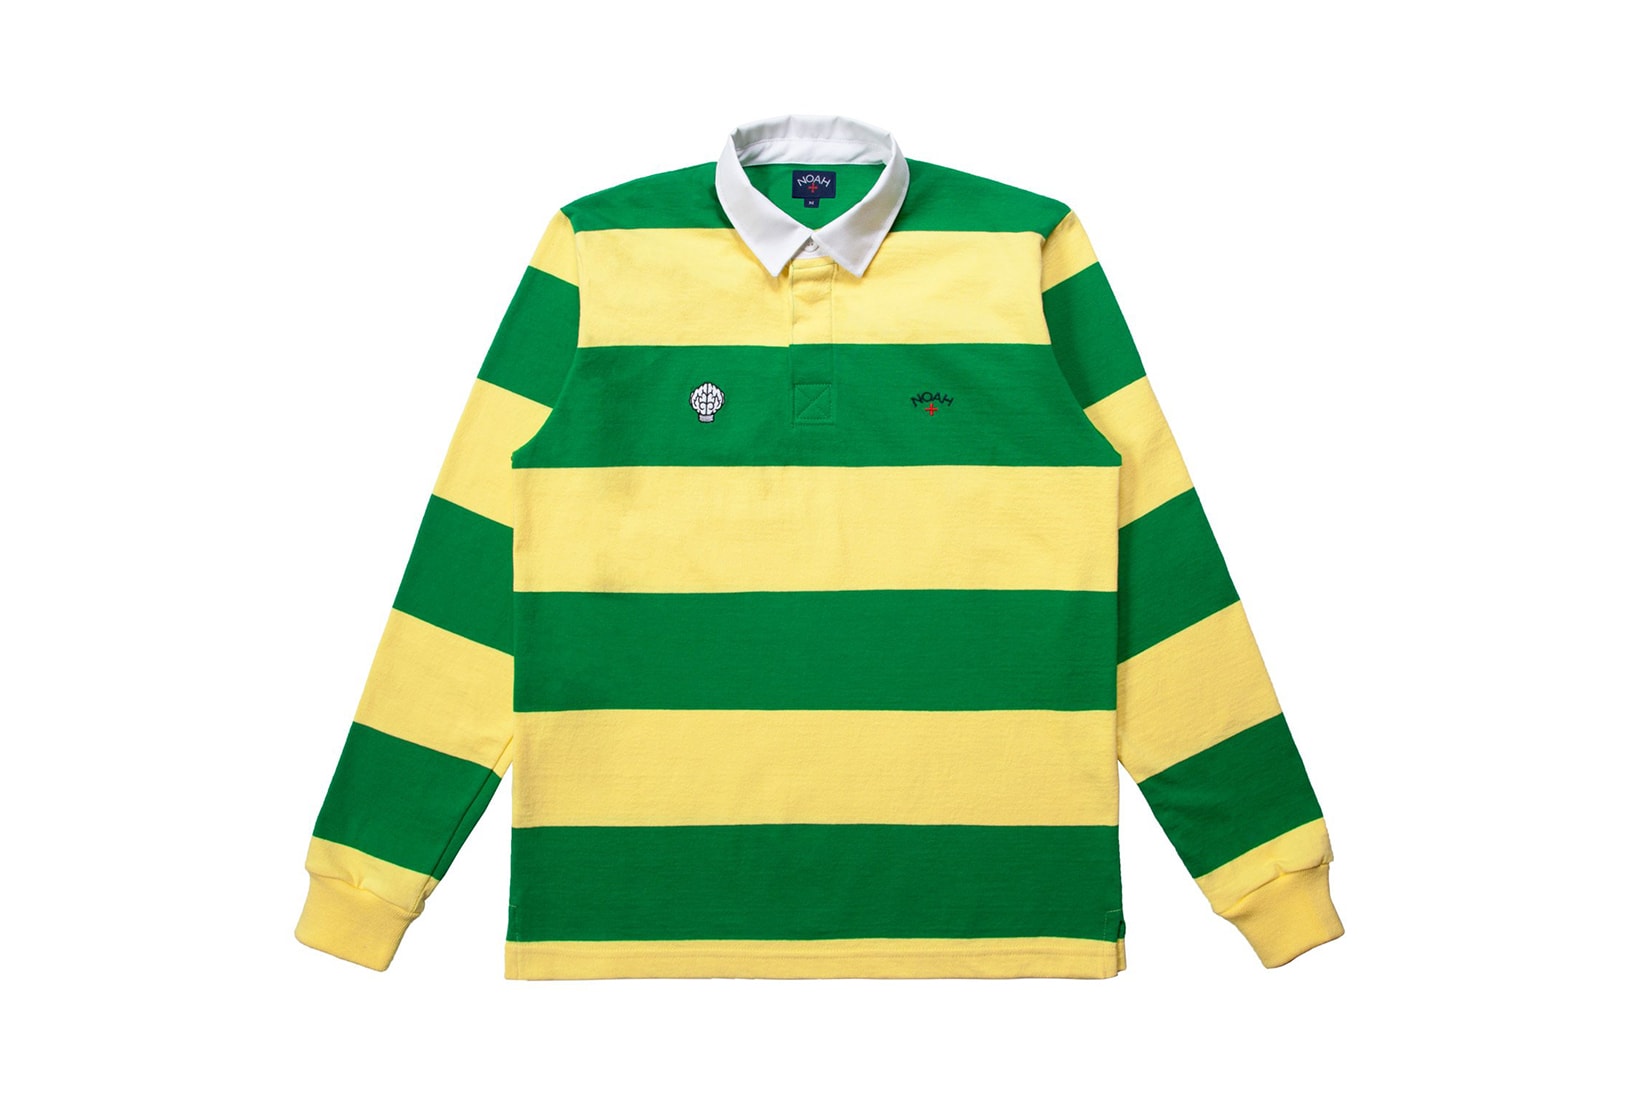 Noah NERD Rugby Top fashion red blue yellow green Release Info Drops Date